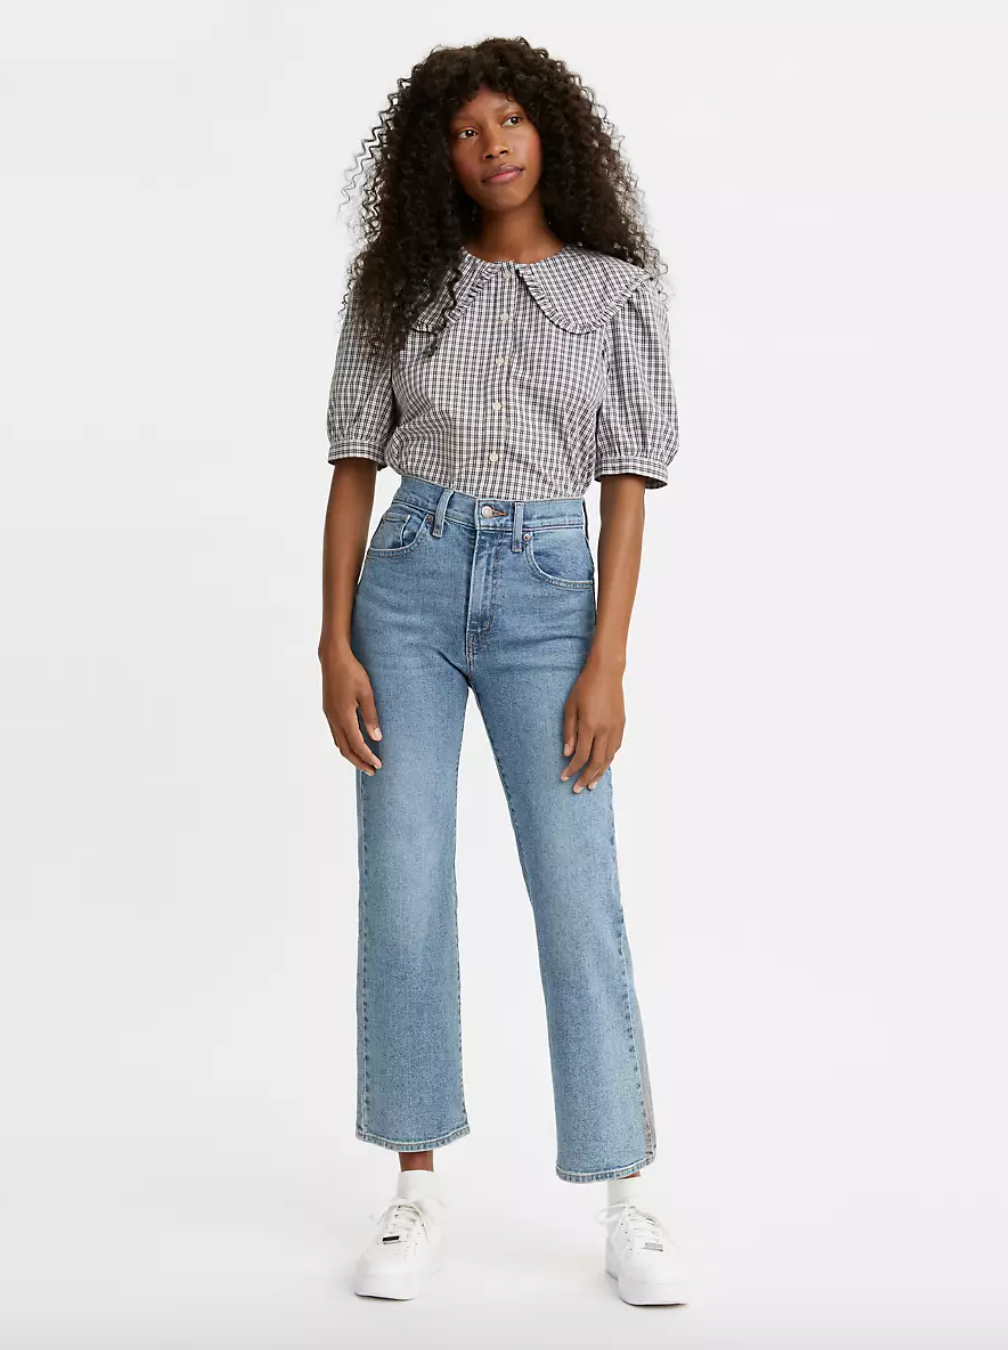 Can't Figure Out How To Actually Wear Crop Flare Jeans? These